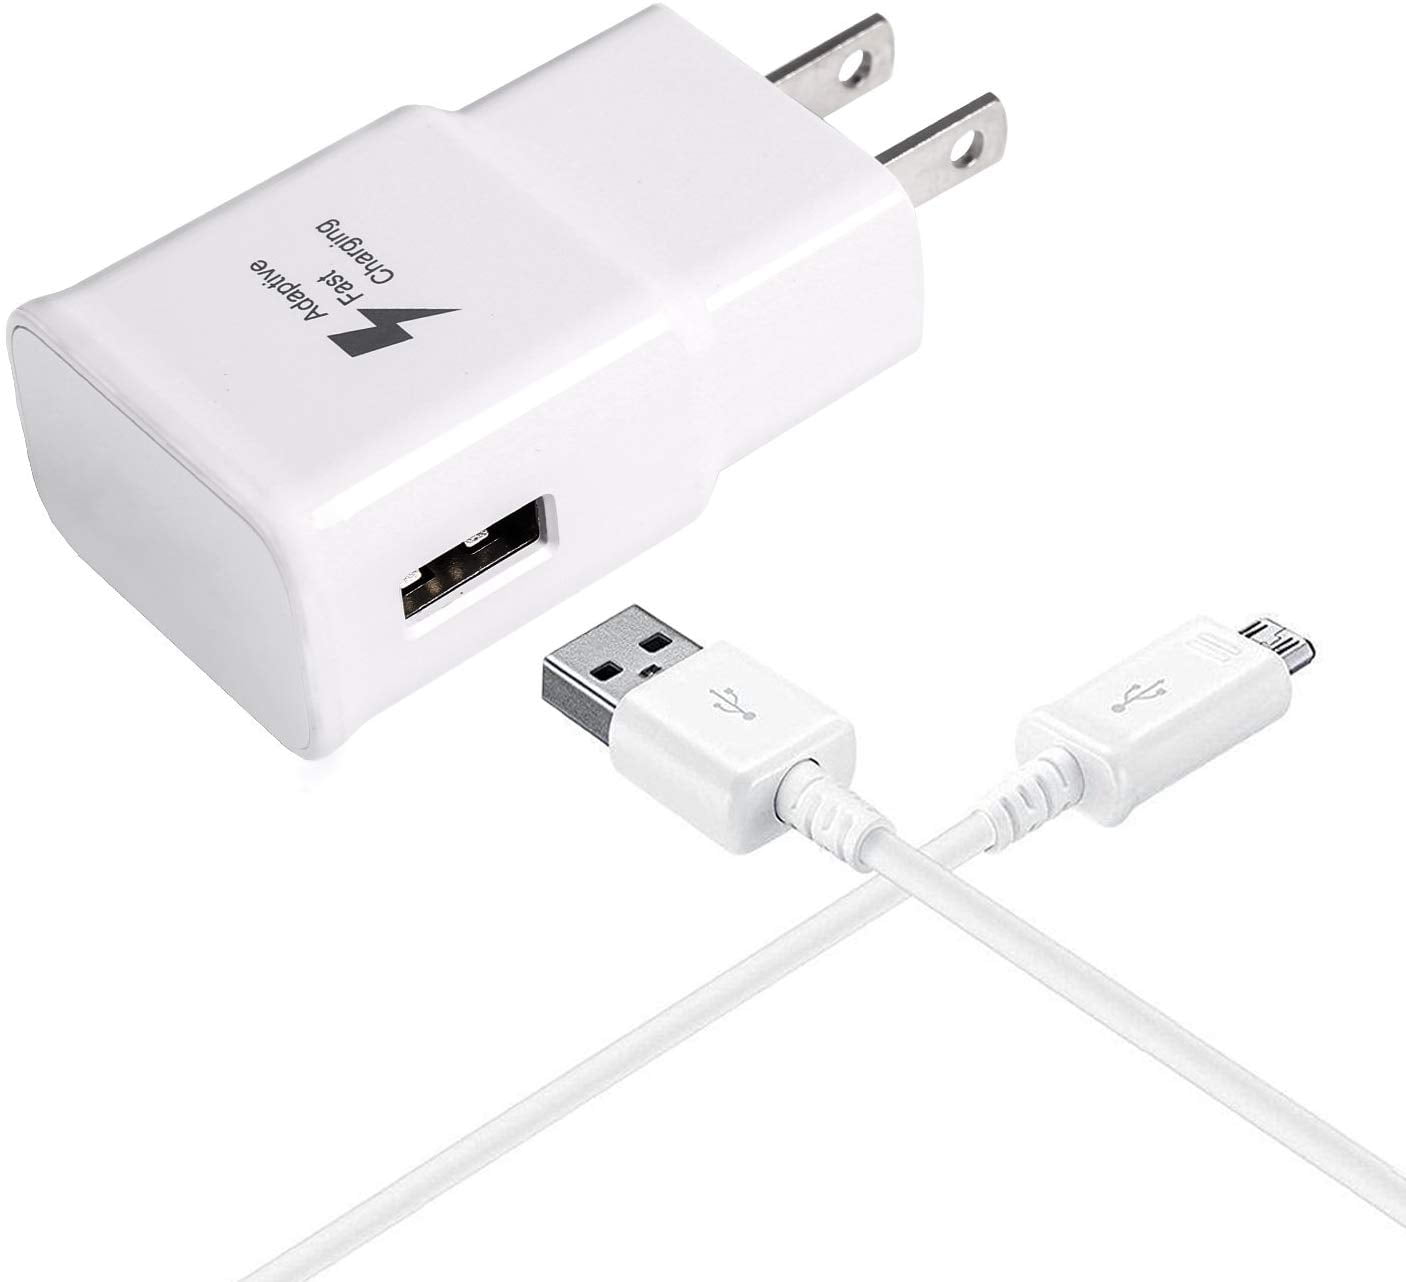 Original OEM Samsung Adaptive Fast Charging Wall Adapter Charger with Micro  USB Cable, White - for Samsung Galaxy S7 / S7 Edge / S6 / S5 / Note 5 / 4 /  S3 - Bulk Packaging 